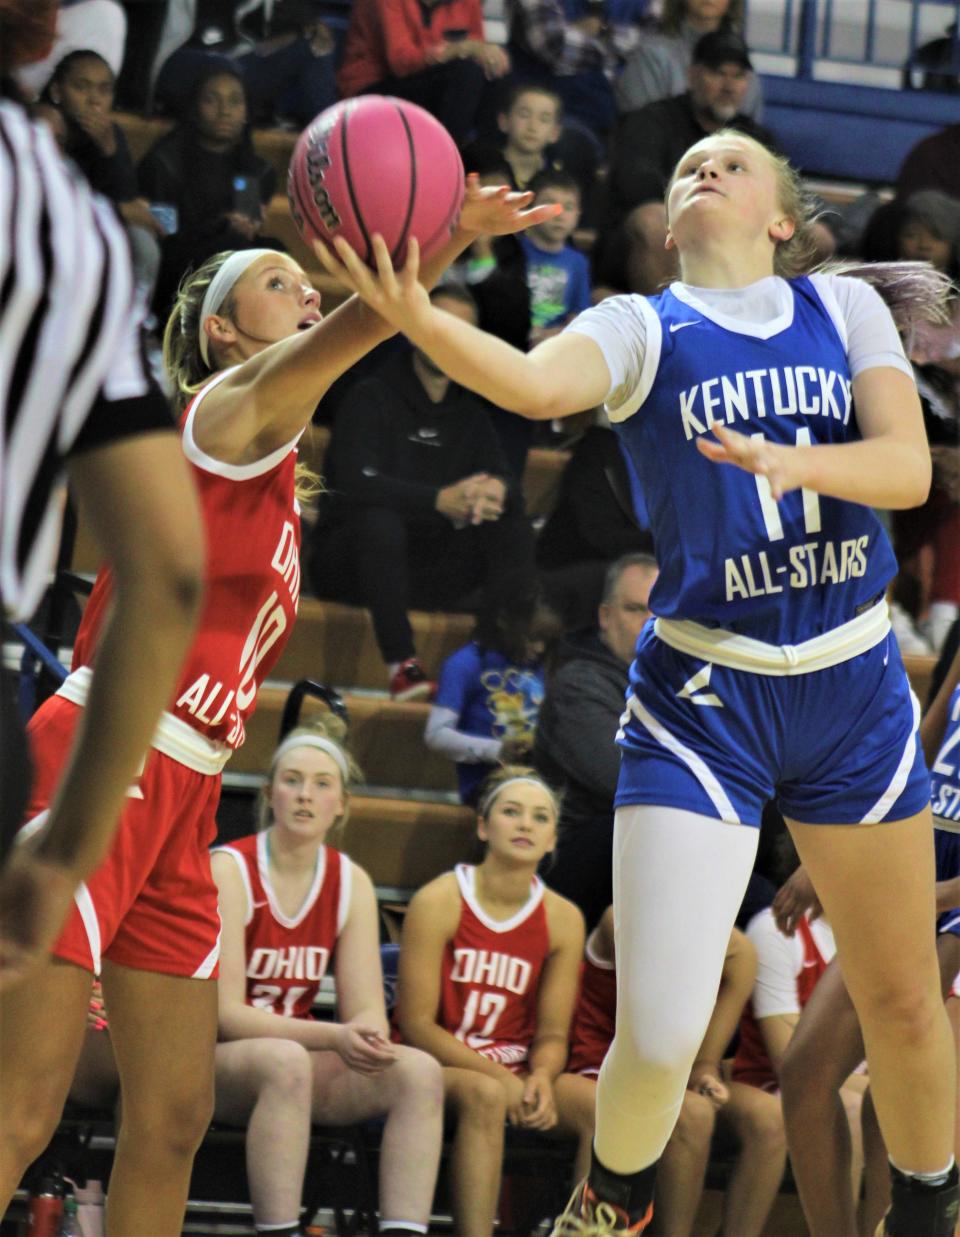 Ryle's Abby Holtman goes up for a shot as Kentucky defeated Ohio 117-94 in the girls edition of the Ohio-Kentucky All-Star Game April 8, 2023, at Thomas More University's Connor Convocation Center.